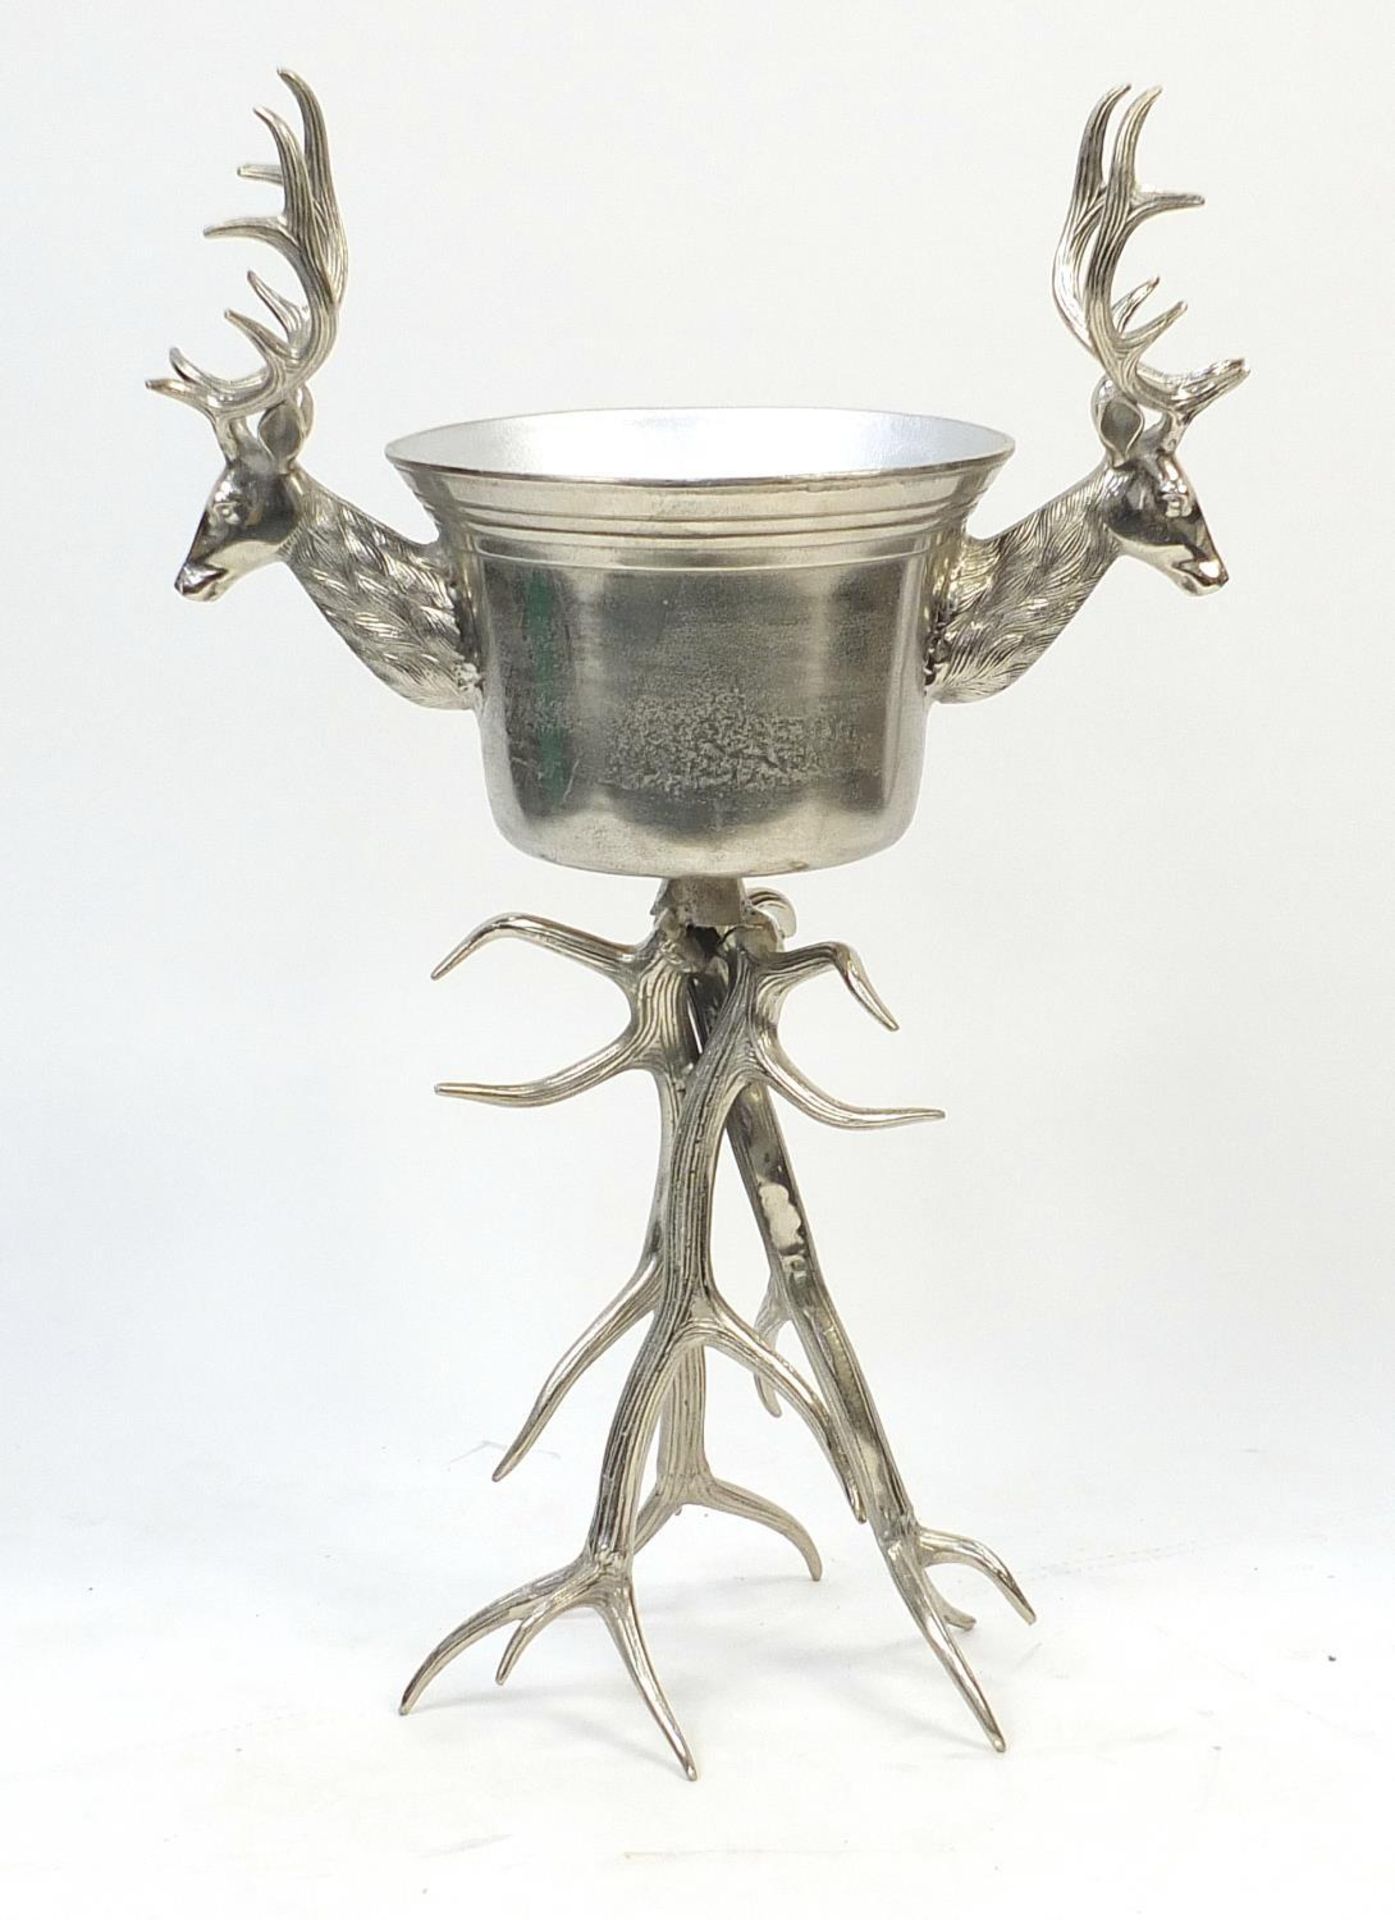 Silvered staghorn design floor standing ice bucket with stag's heads, 104.5 high x 70cm wide :